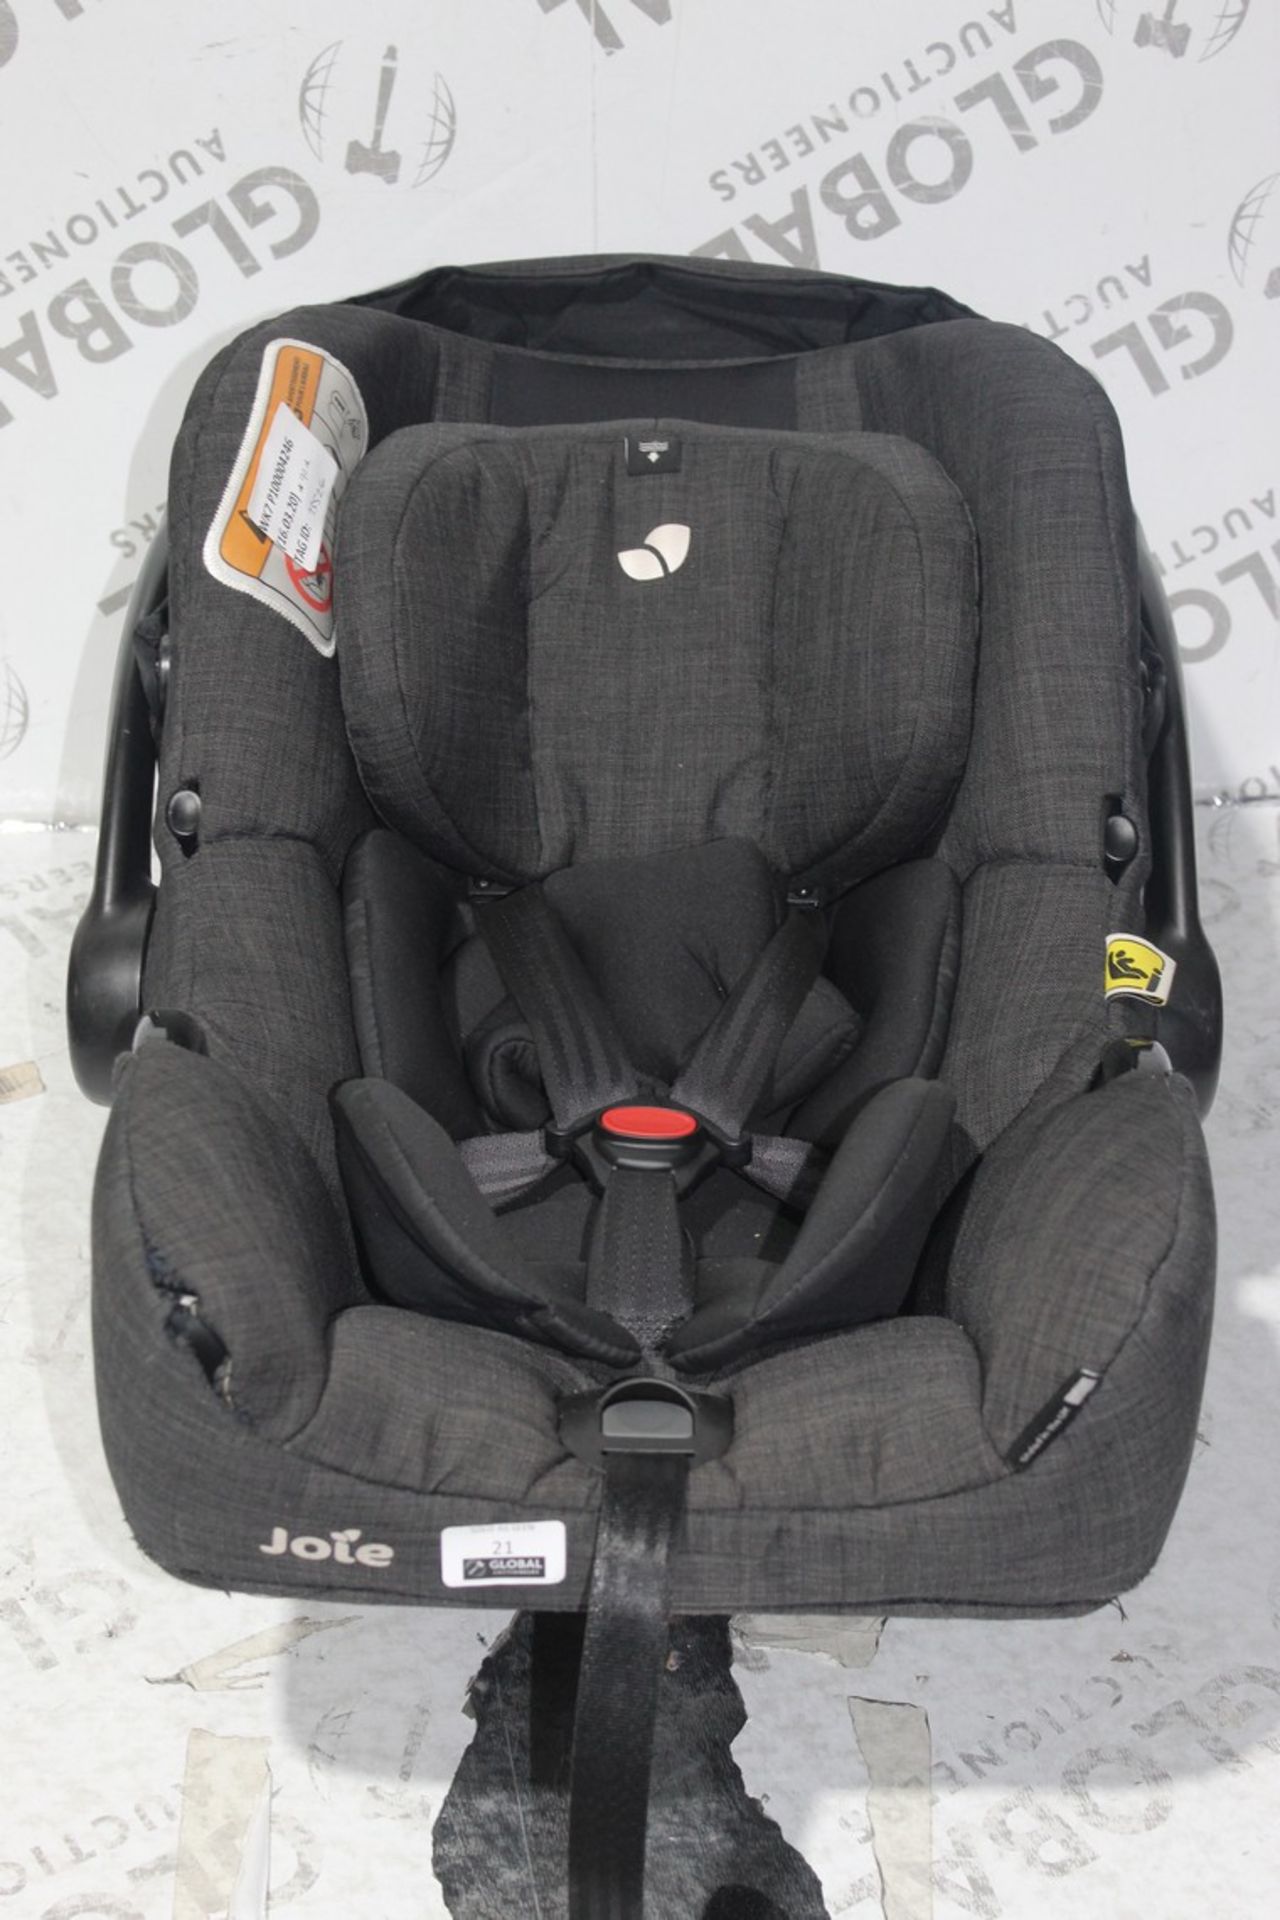 Joie Newborn In Car Safety Seat RRP £90 (75526) (Appraisals Available)